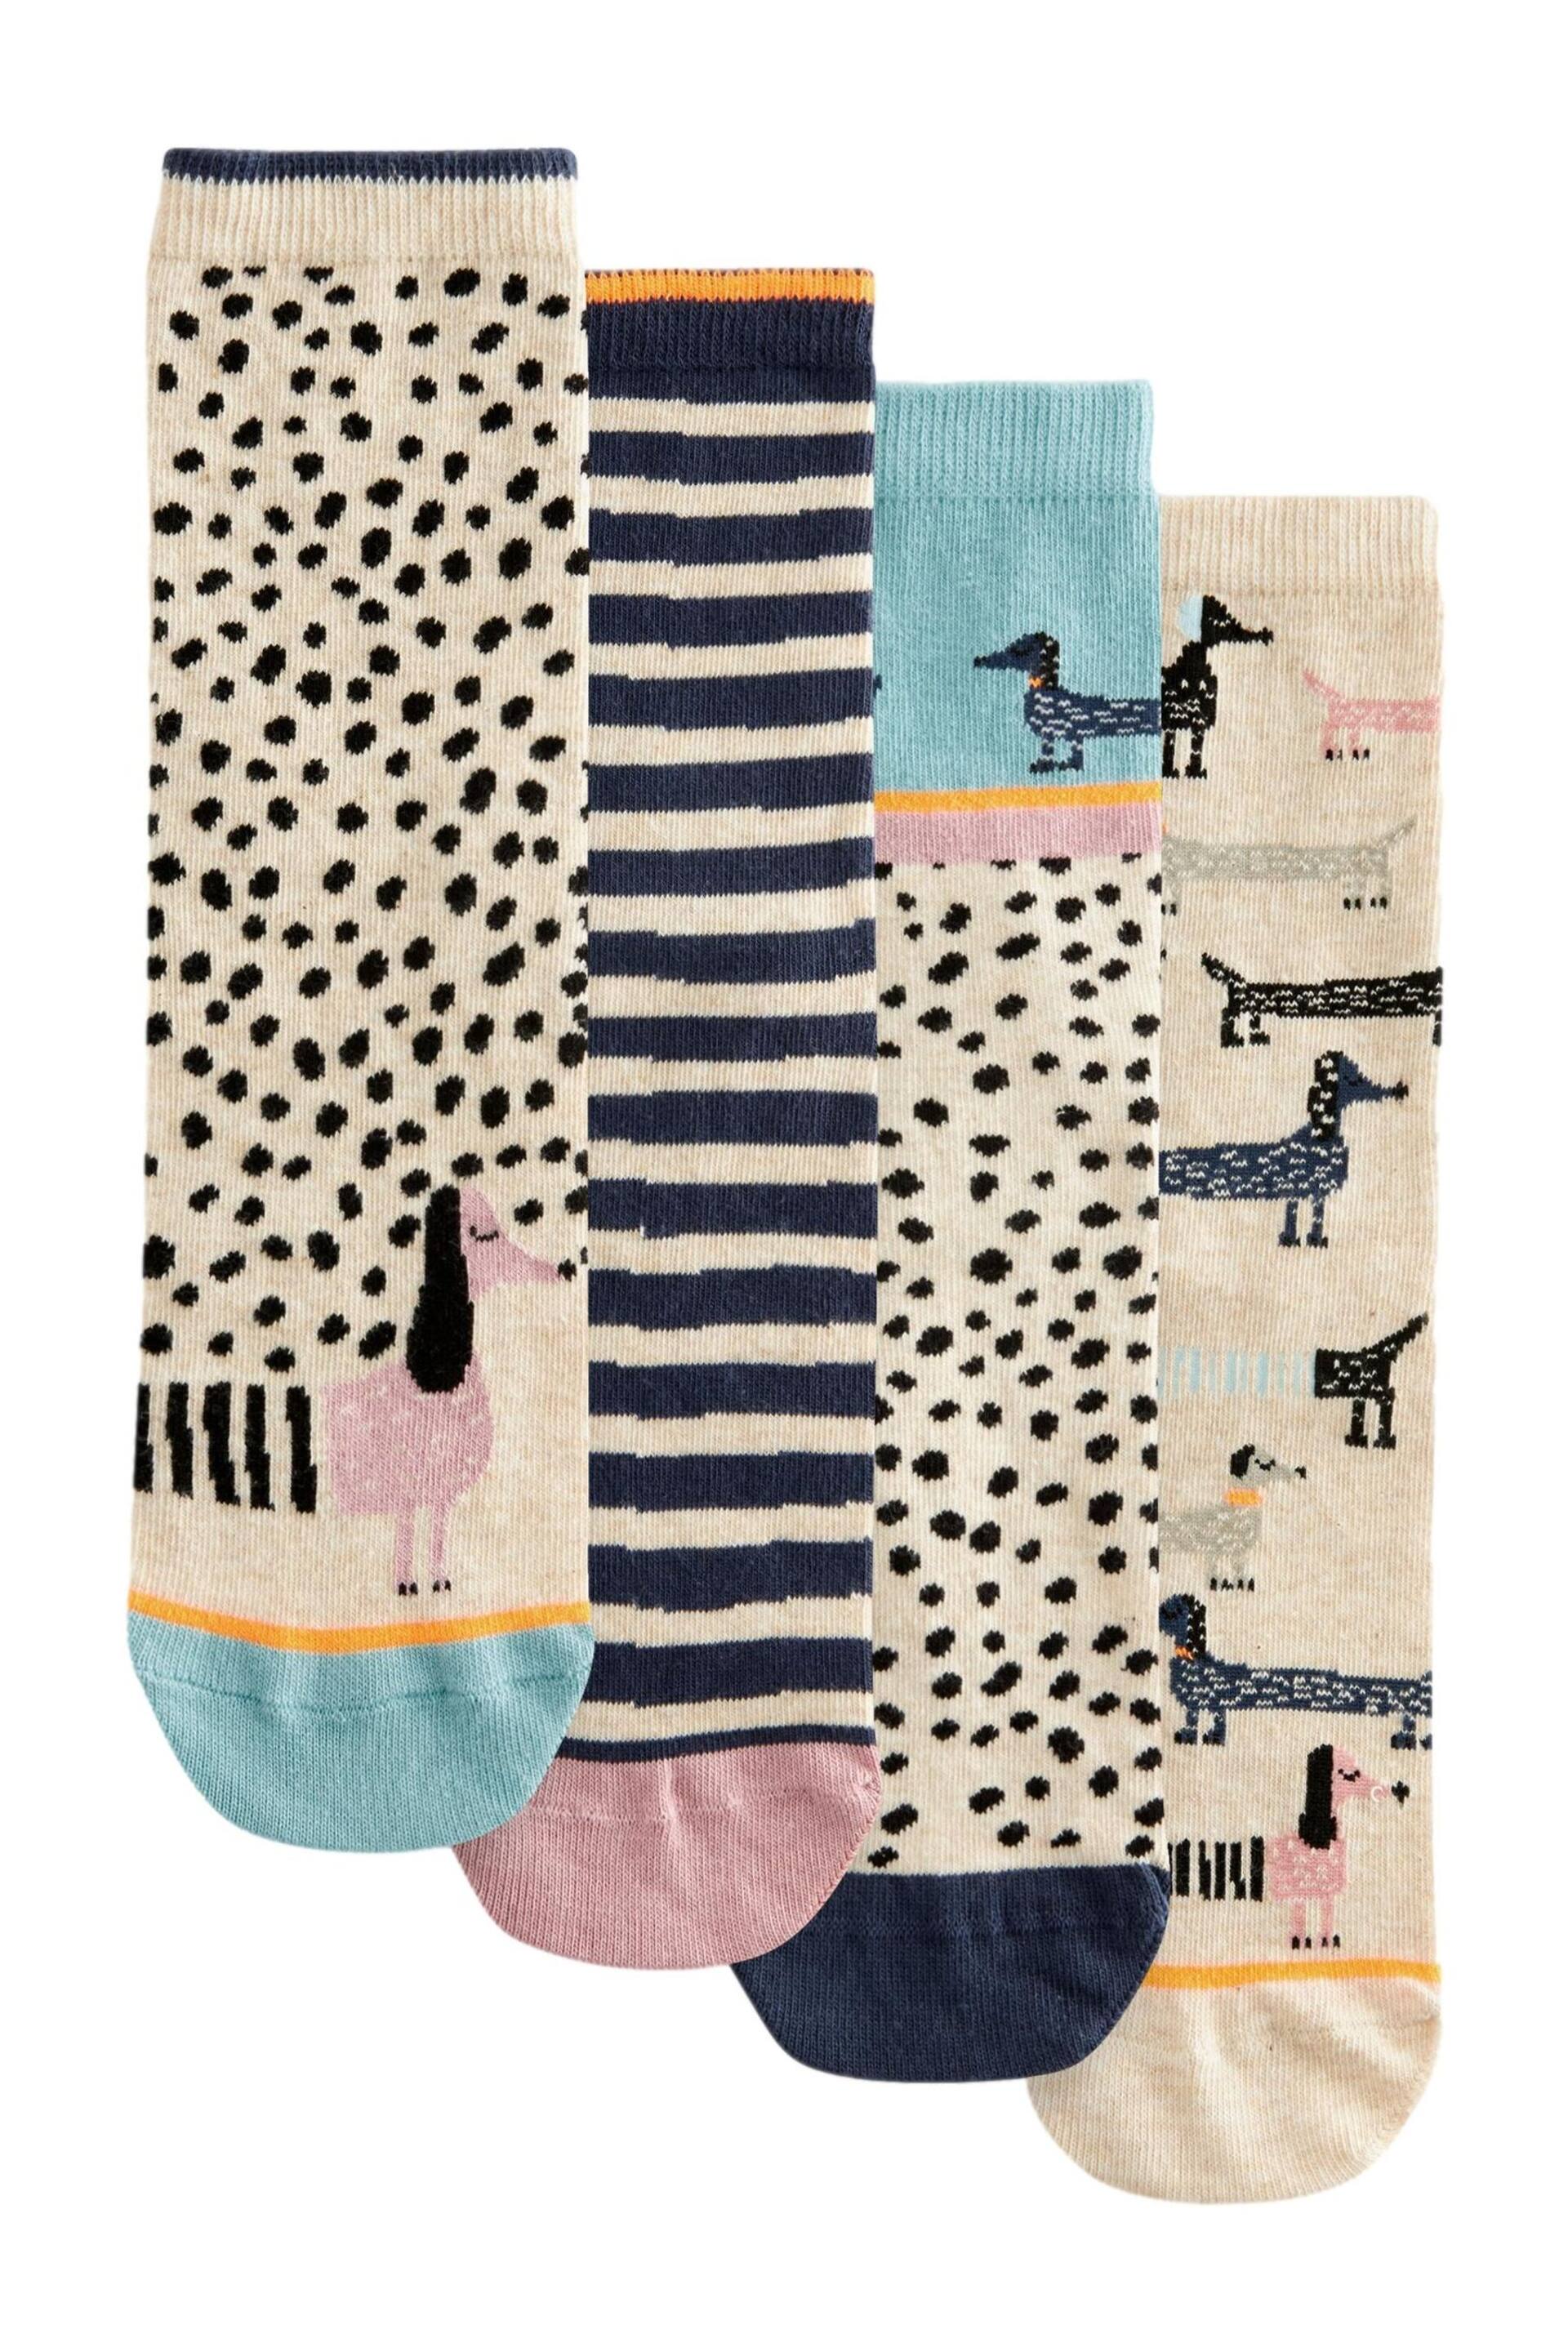 Sausage Dogs Pattern Ankle Socks 4 Pack - Image 1 of 5